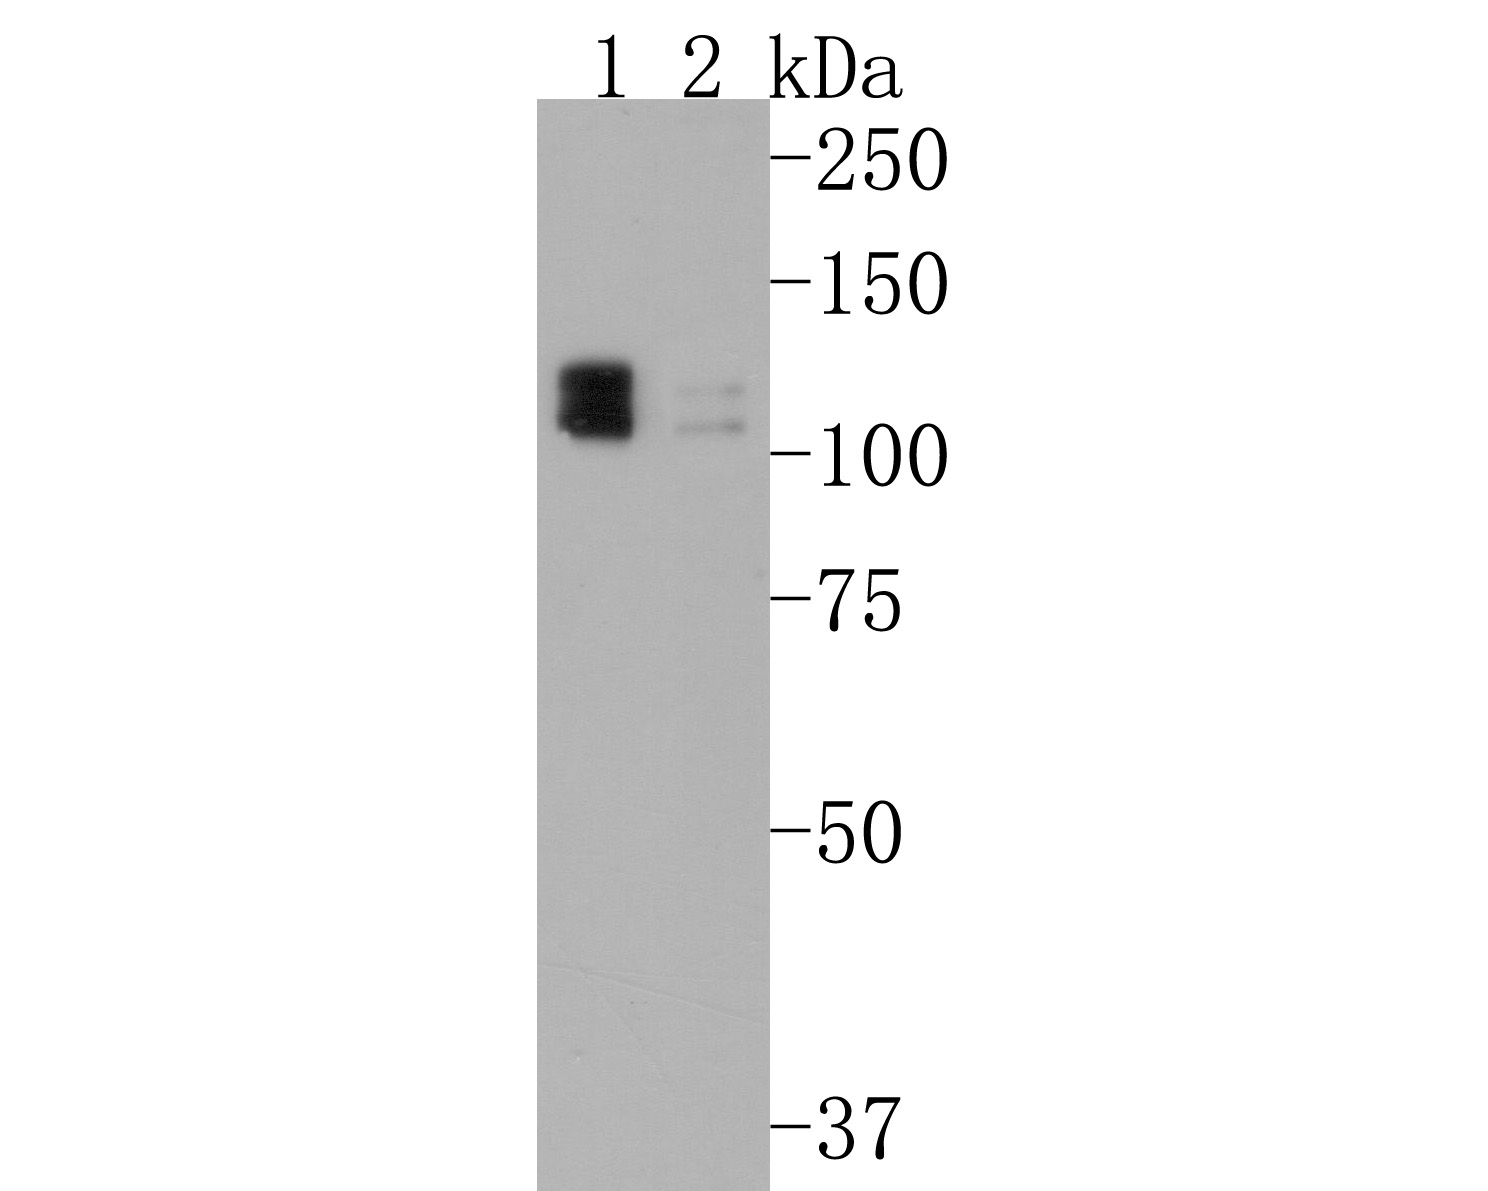 Western blot analysis of Calpastatin on different lysates. Proteins were transferred to a PVDF membrane and blocked with 5% BSA in PBS for 1 hour at room temperature. The primary antibody (HA600072, 1/500) was used in 5% BSA at room temperature for 2 hours. Goat Anti-Mouse IgG - HRP Secondary Antibody (HA1006) at 1:20,000 dilution was used for 1 hour at room temperature.<br />
Positive control:<br />
Lane 1: Hela cell lysate<br />
Lane 2: SiHa cell lysate<br />
<br />
Predicted band size: 76.5 kDa<br />
Observed band size: 110-120 kDa